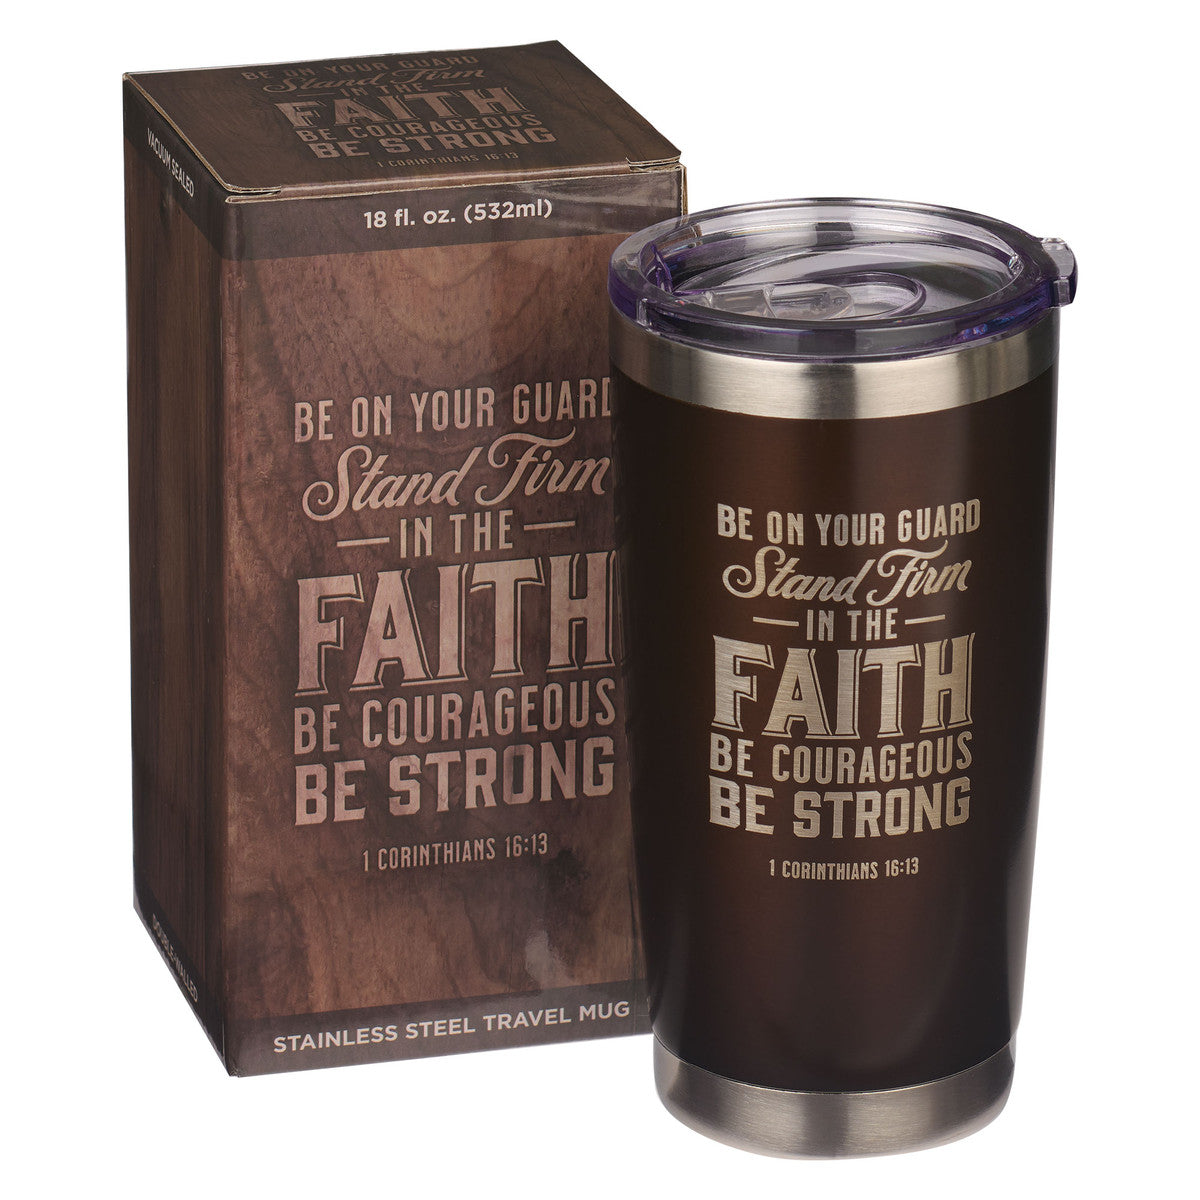 Stand Firm Brown Stainless Steel Mug - 1 Corinthians 16:13 - The Christian Gift Company